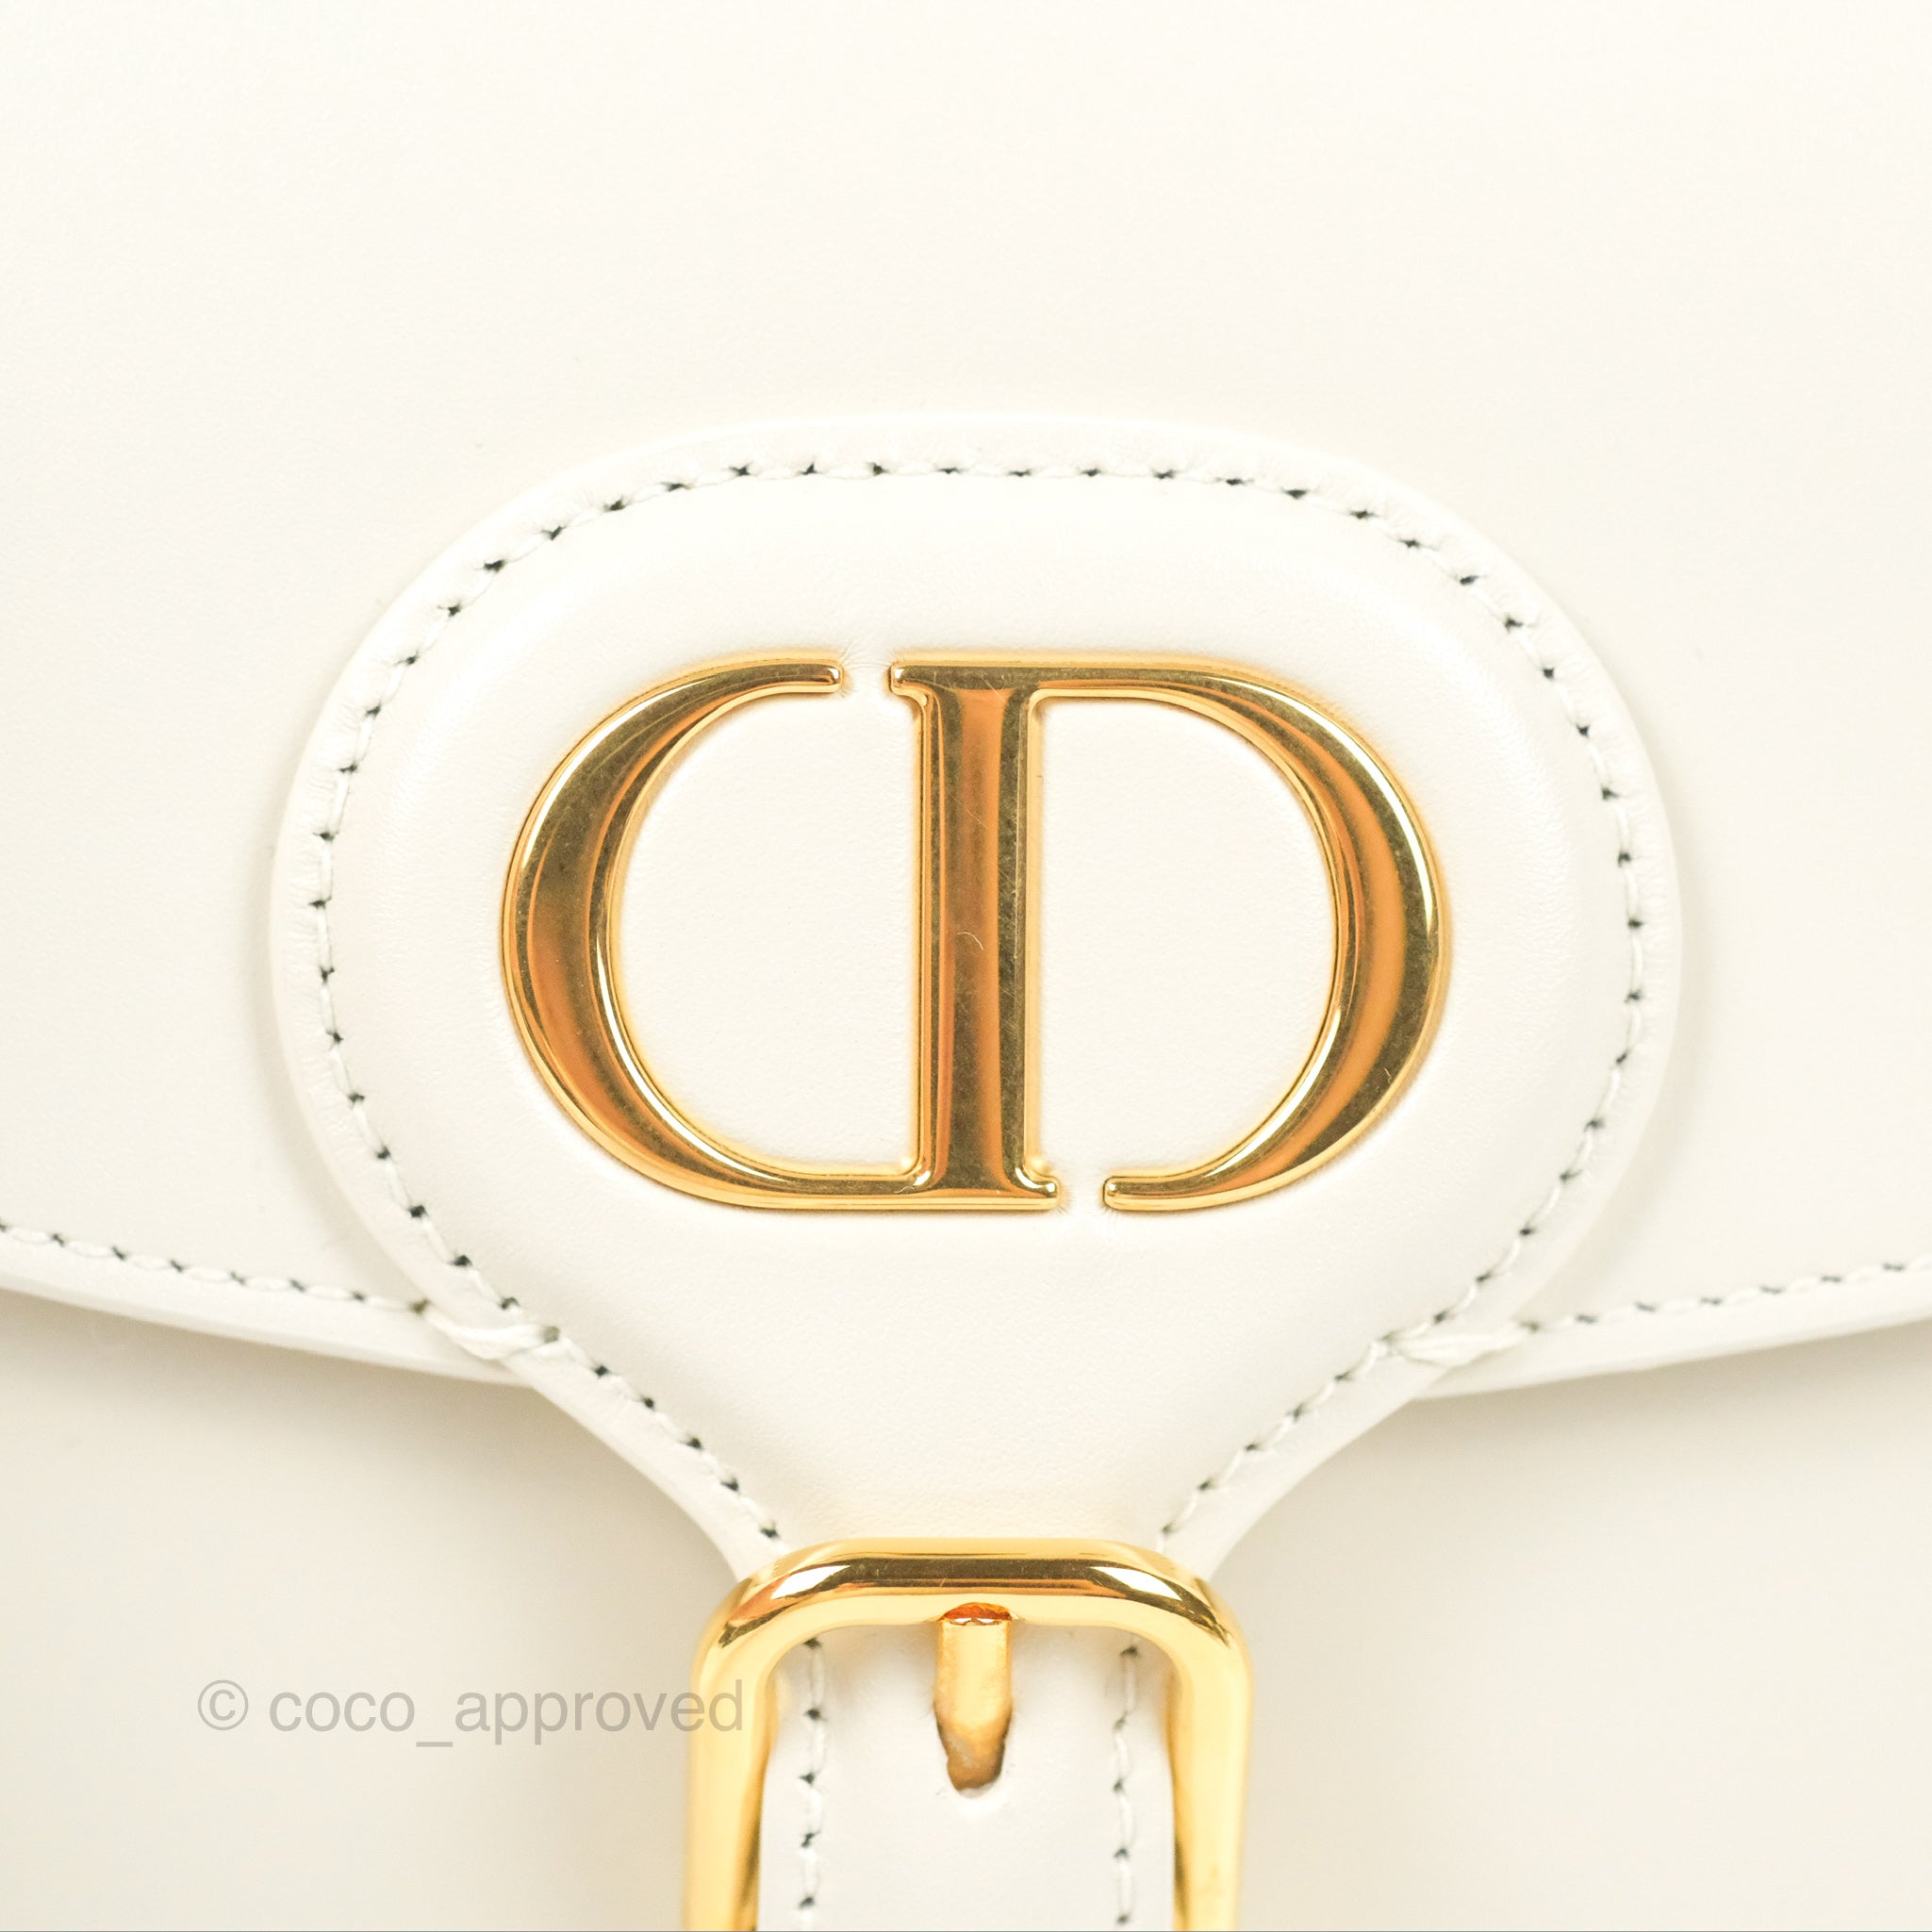 Christian Dior Poppy Red Calfskin Small Bobby Bag Gold Hardware – Madison  Avenue Couture